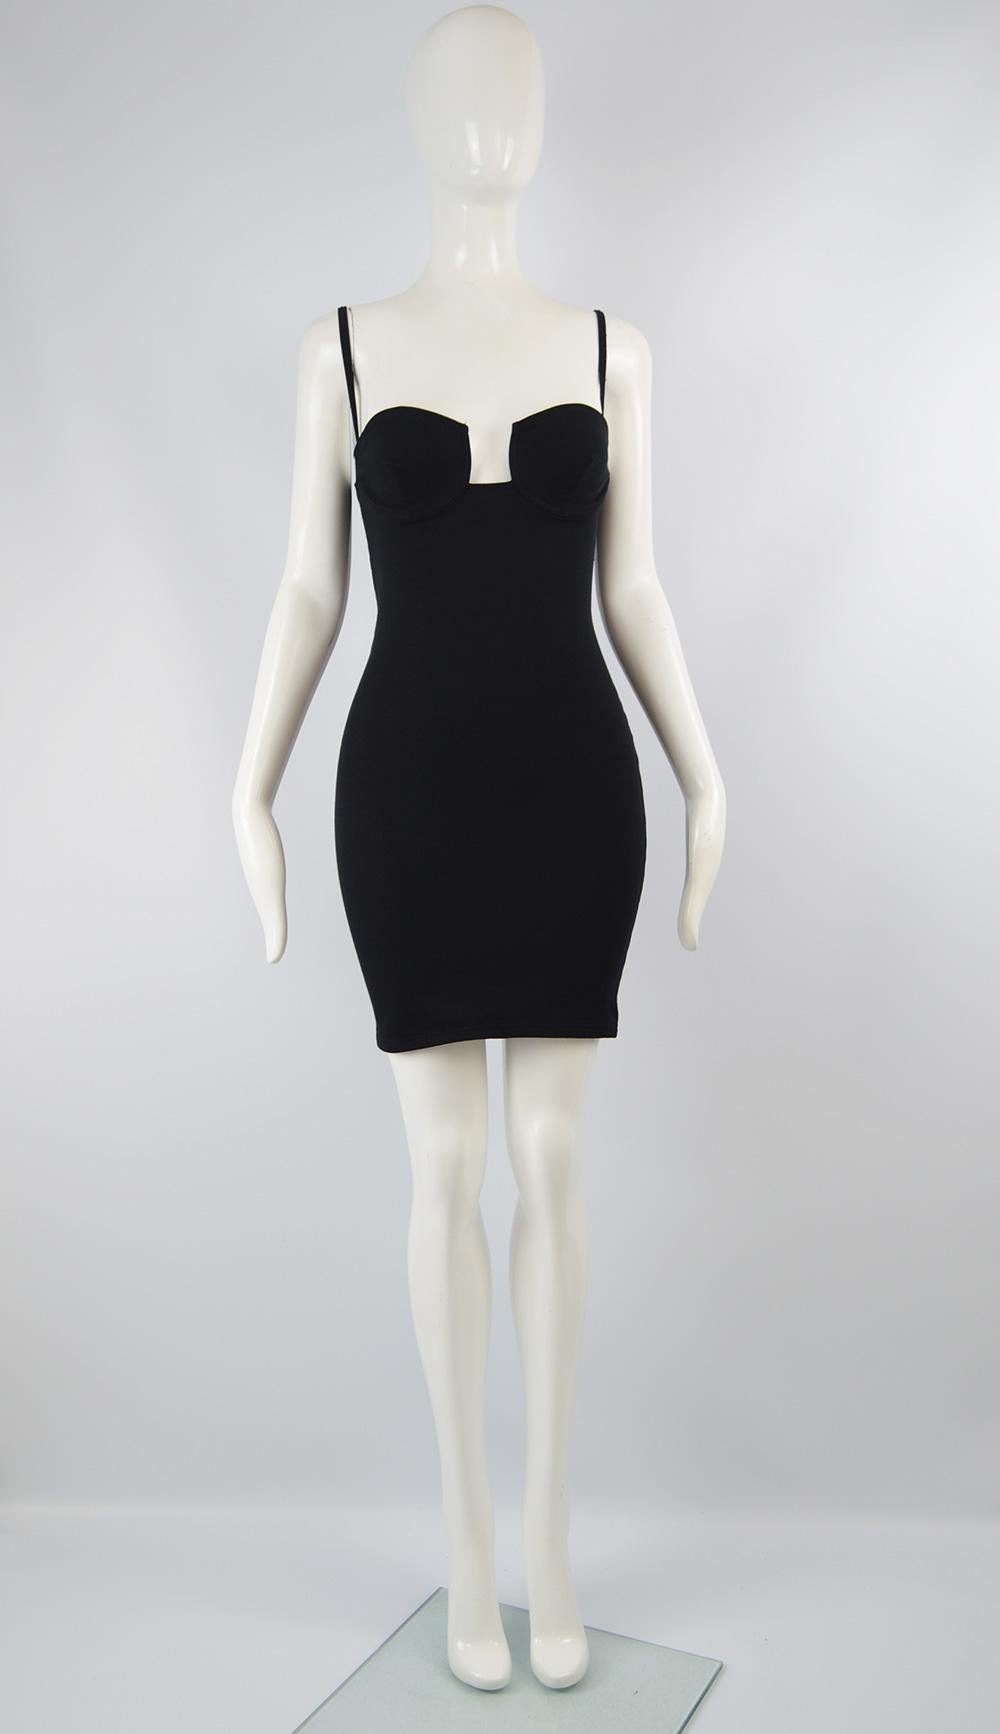 A chic vintage women's mini dress from the 90s by high quality but little known French fashion designer, Andrea Templer. In a black  stretchy lycra and polyamide blend jersey that gives a great body conscious fit. The structured bust has a plunging